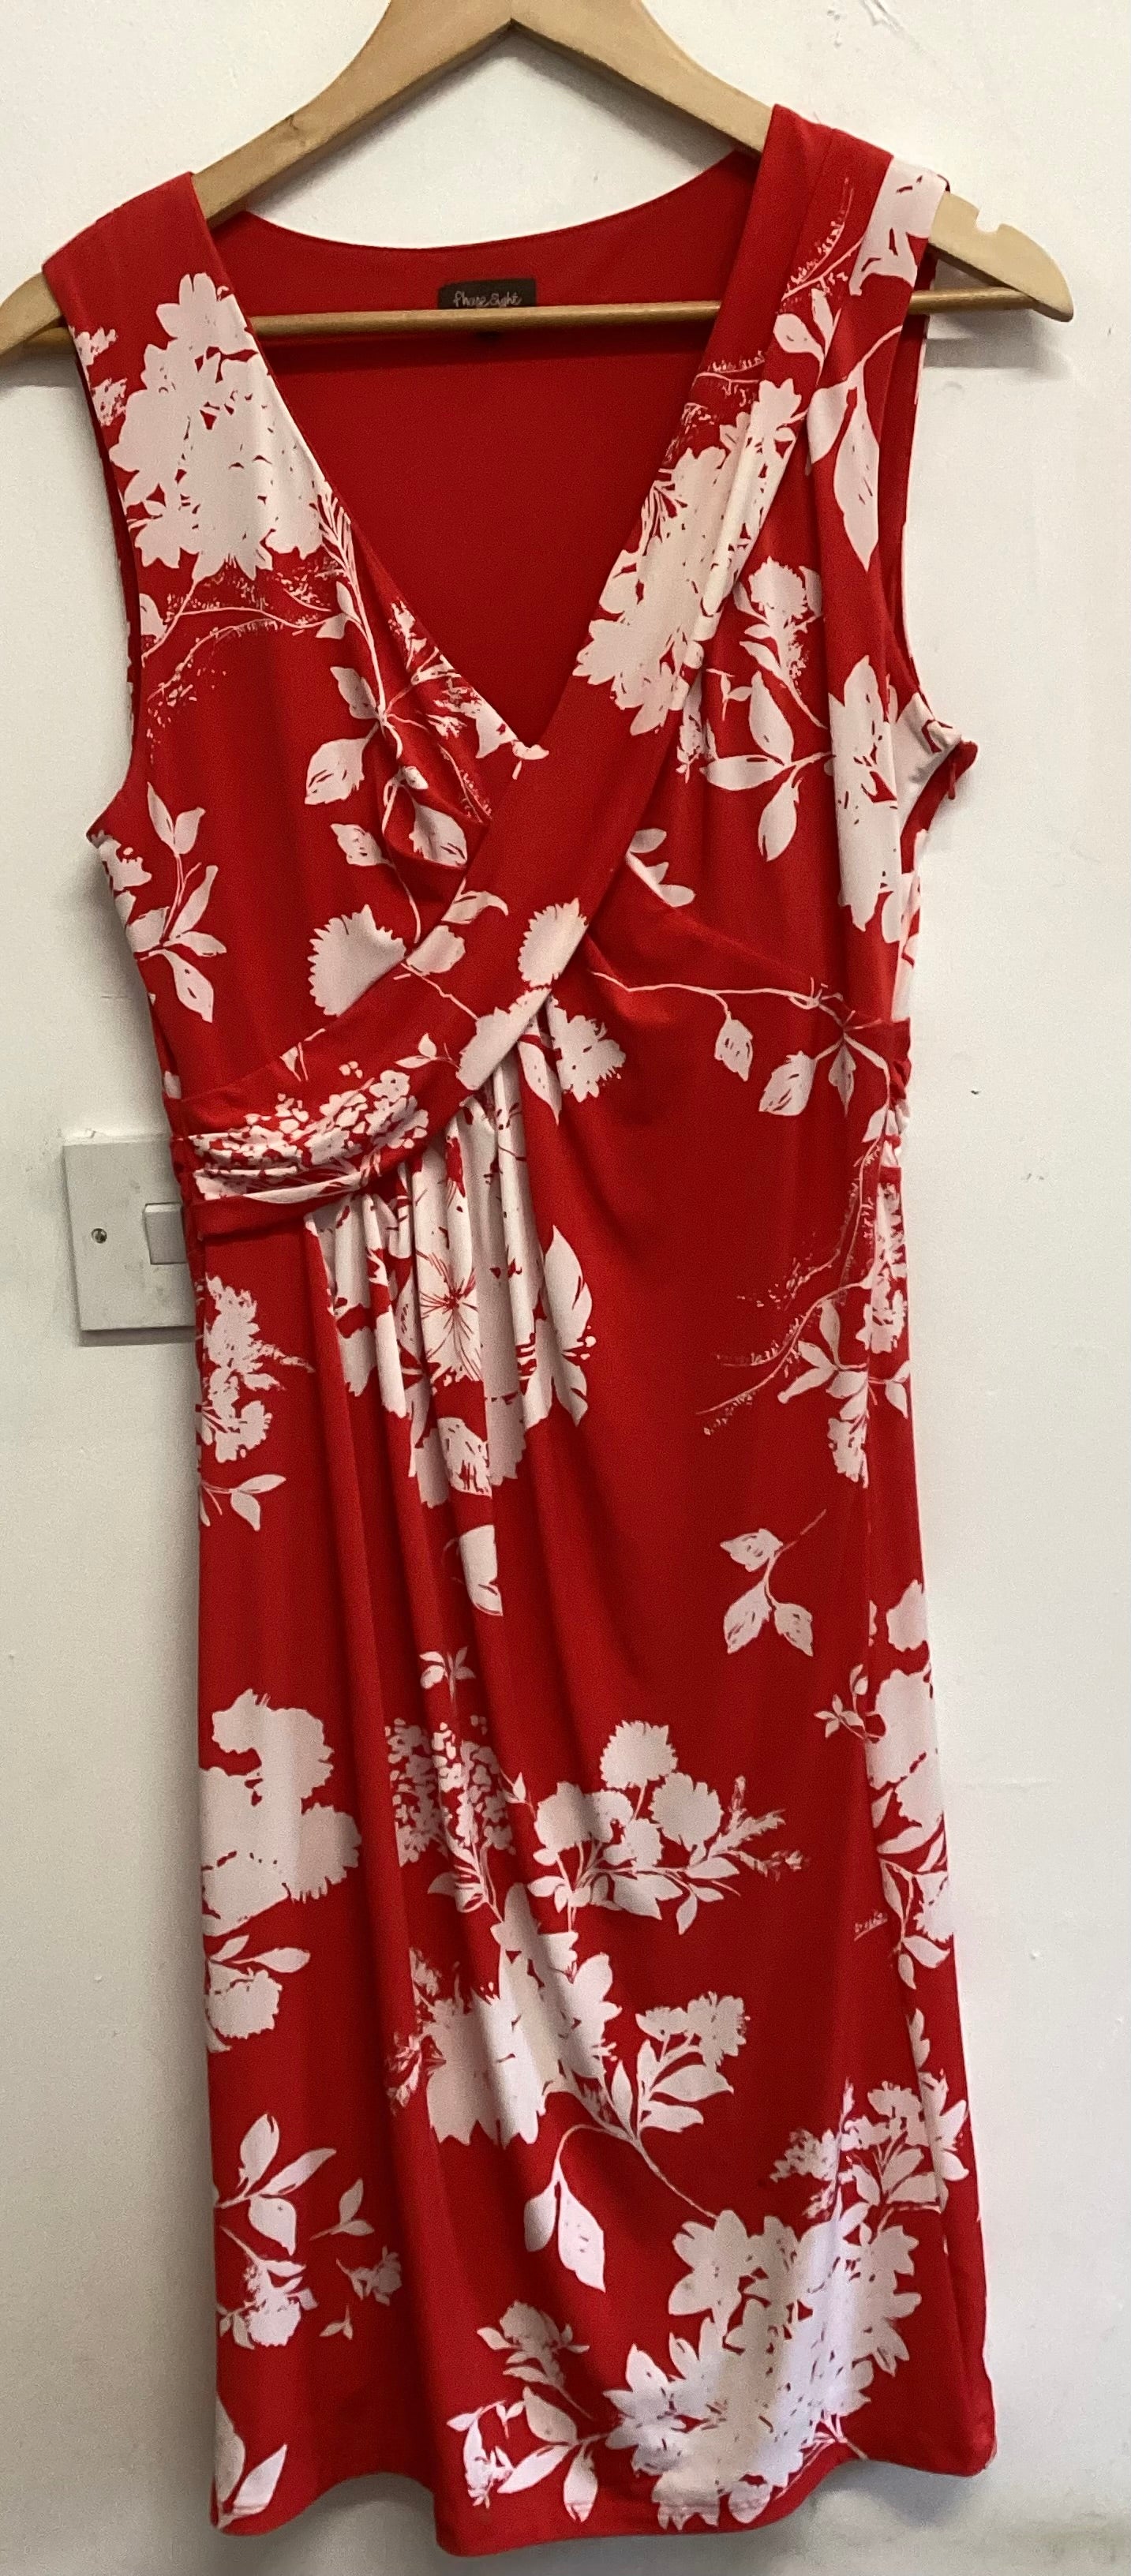 Phase eight red & white dress size 14.